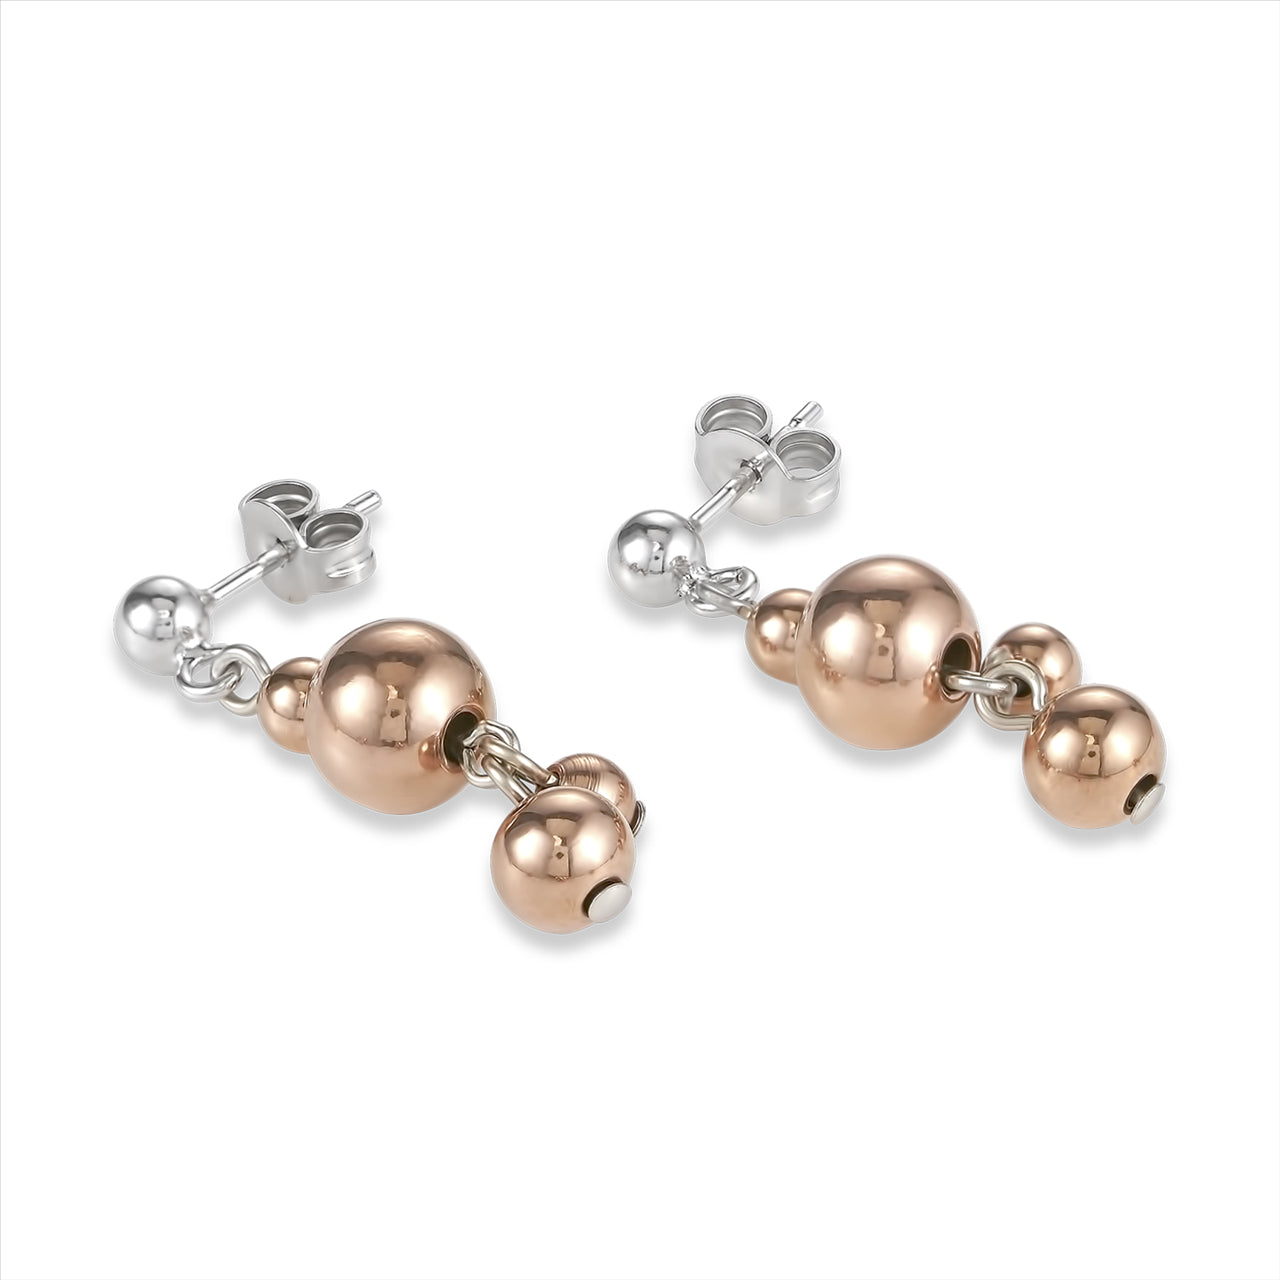 CDL - Stainless steel with rose gold plated stainless steel balls & sterling silver fittings